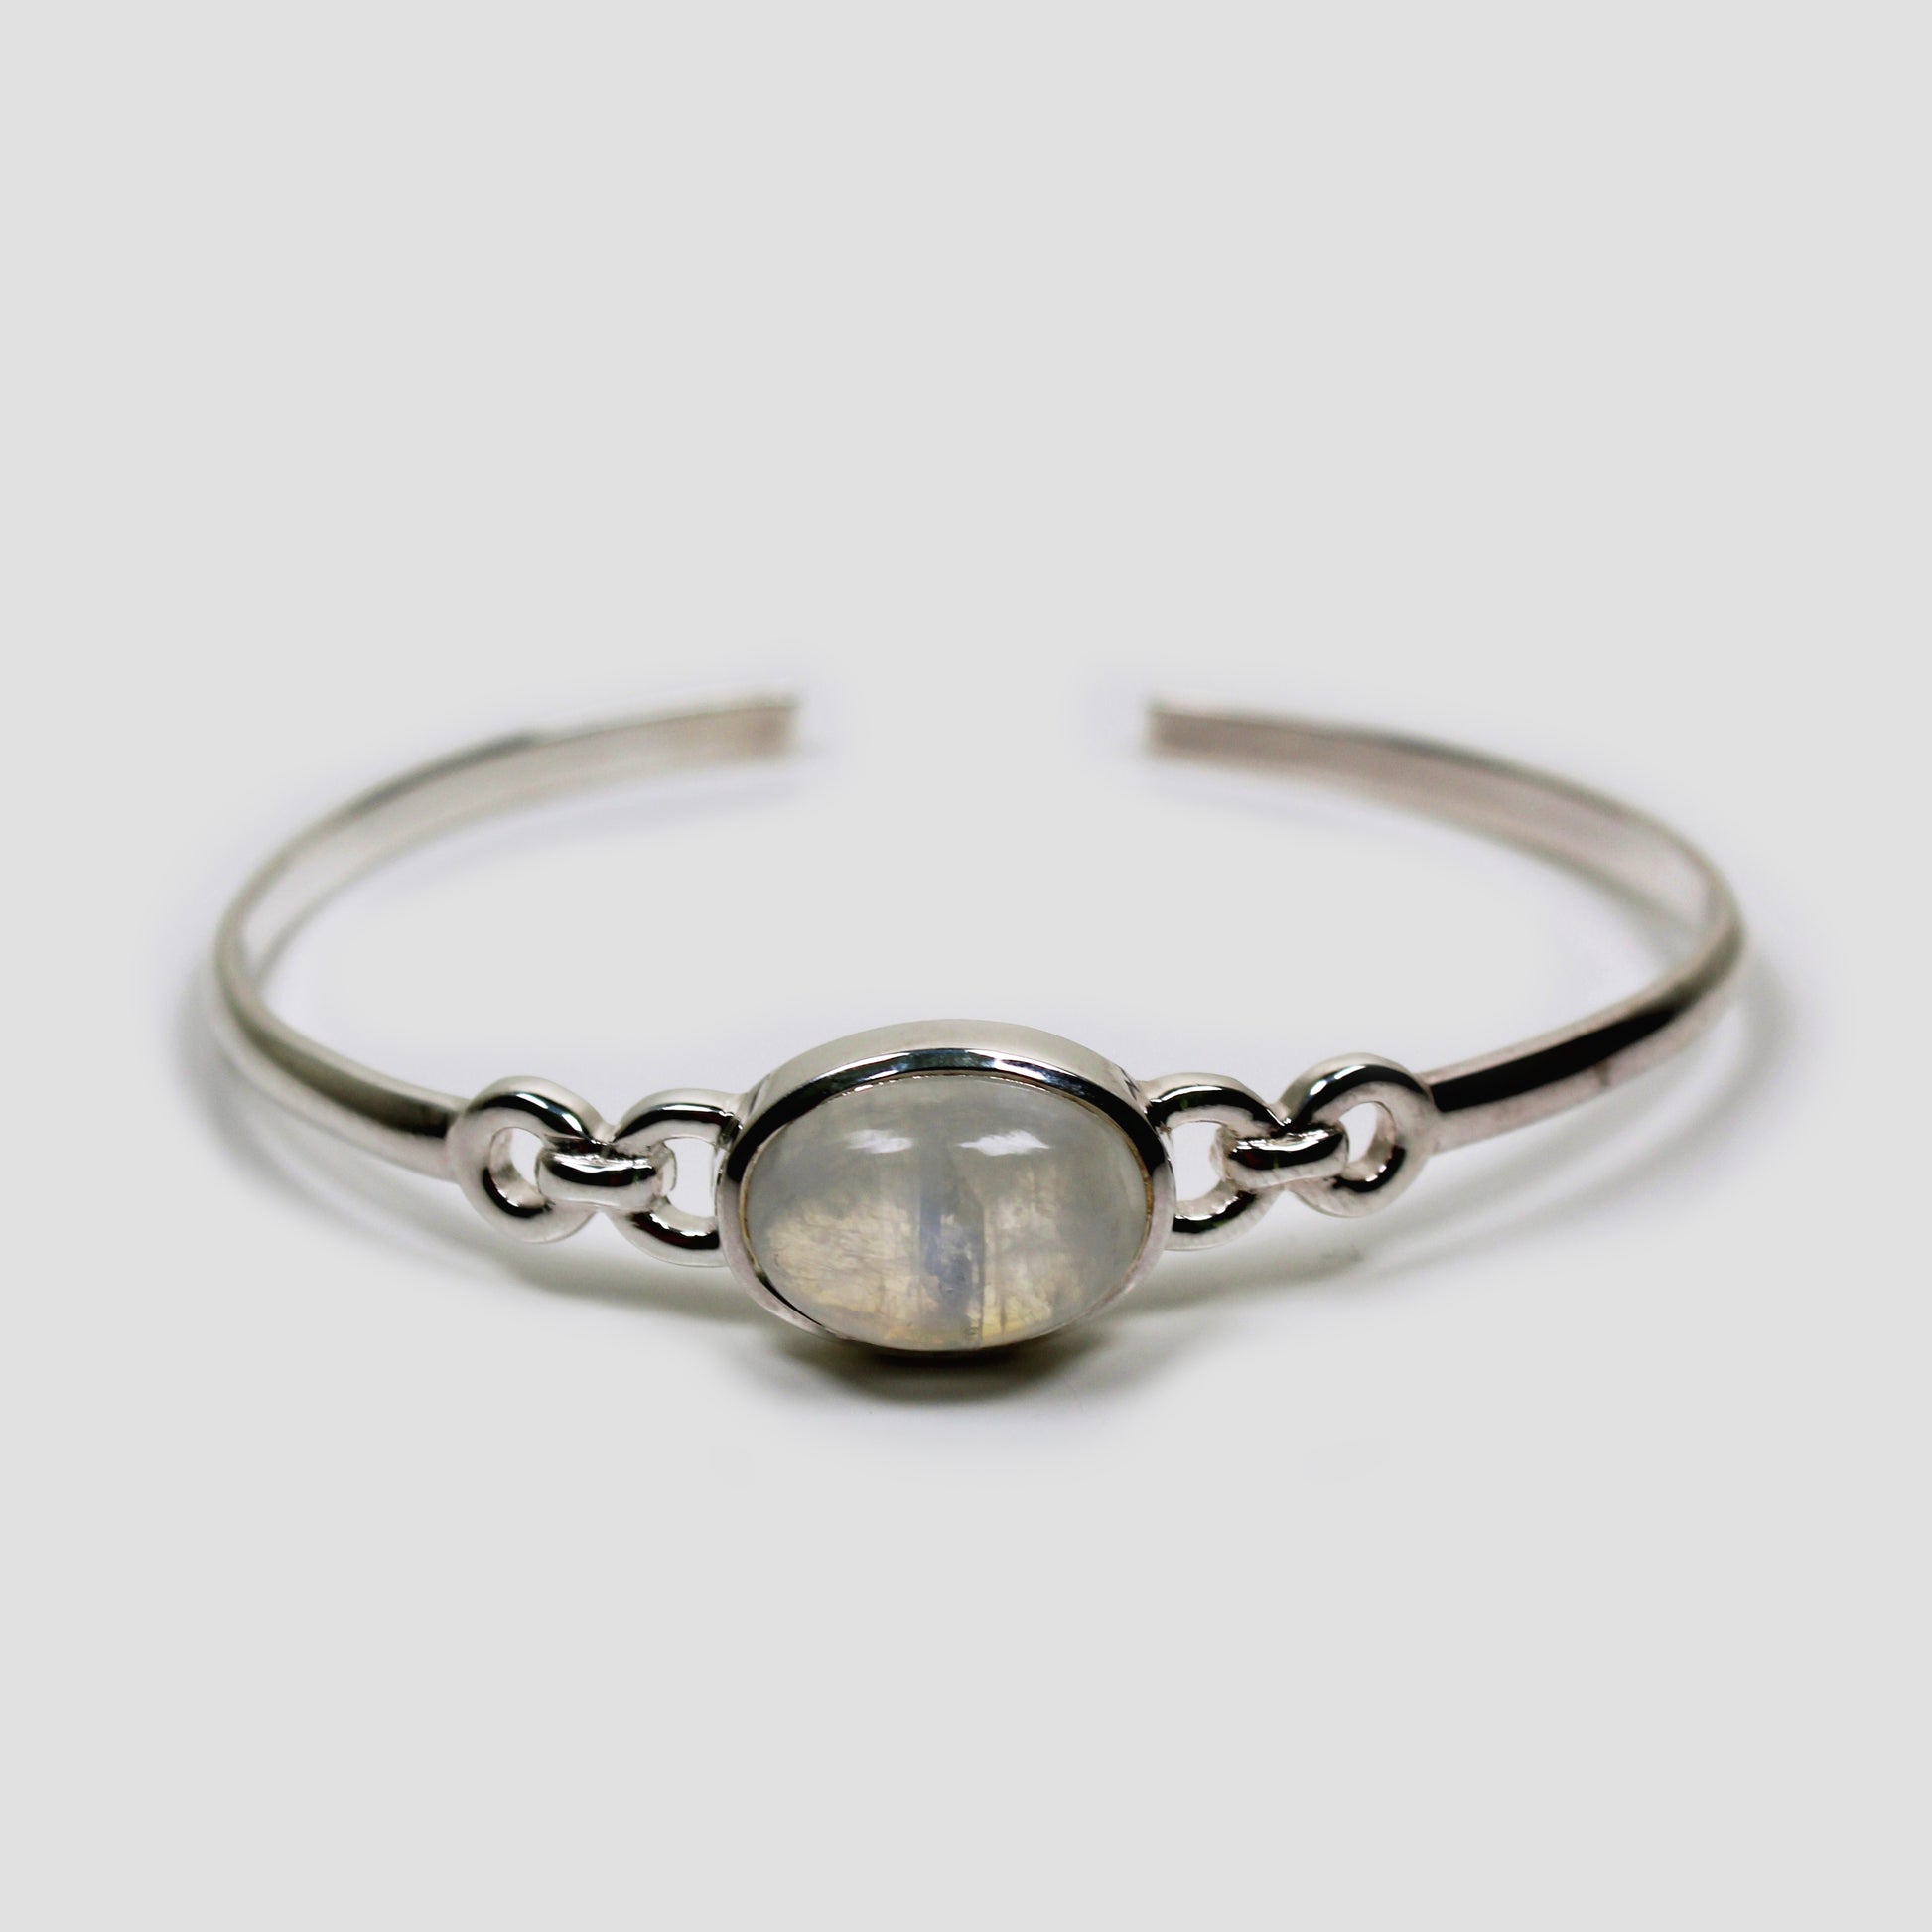 White Moonstone Adjustable Silver Bangle on a gray surface